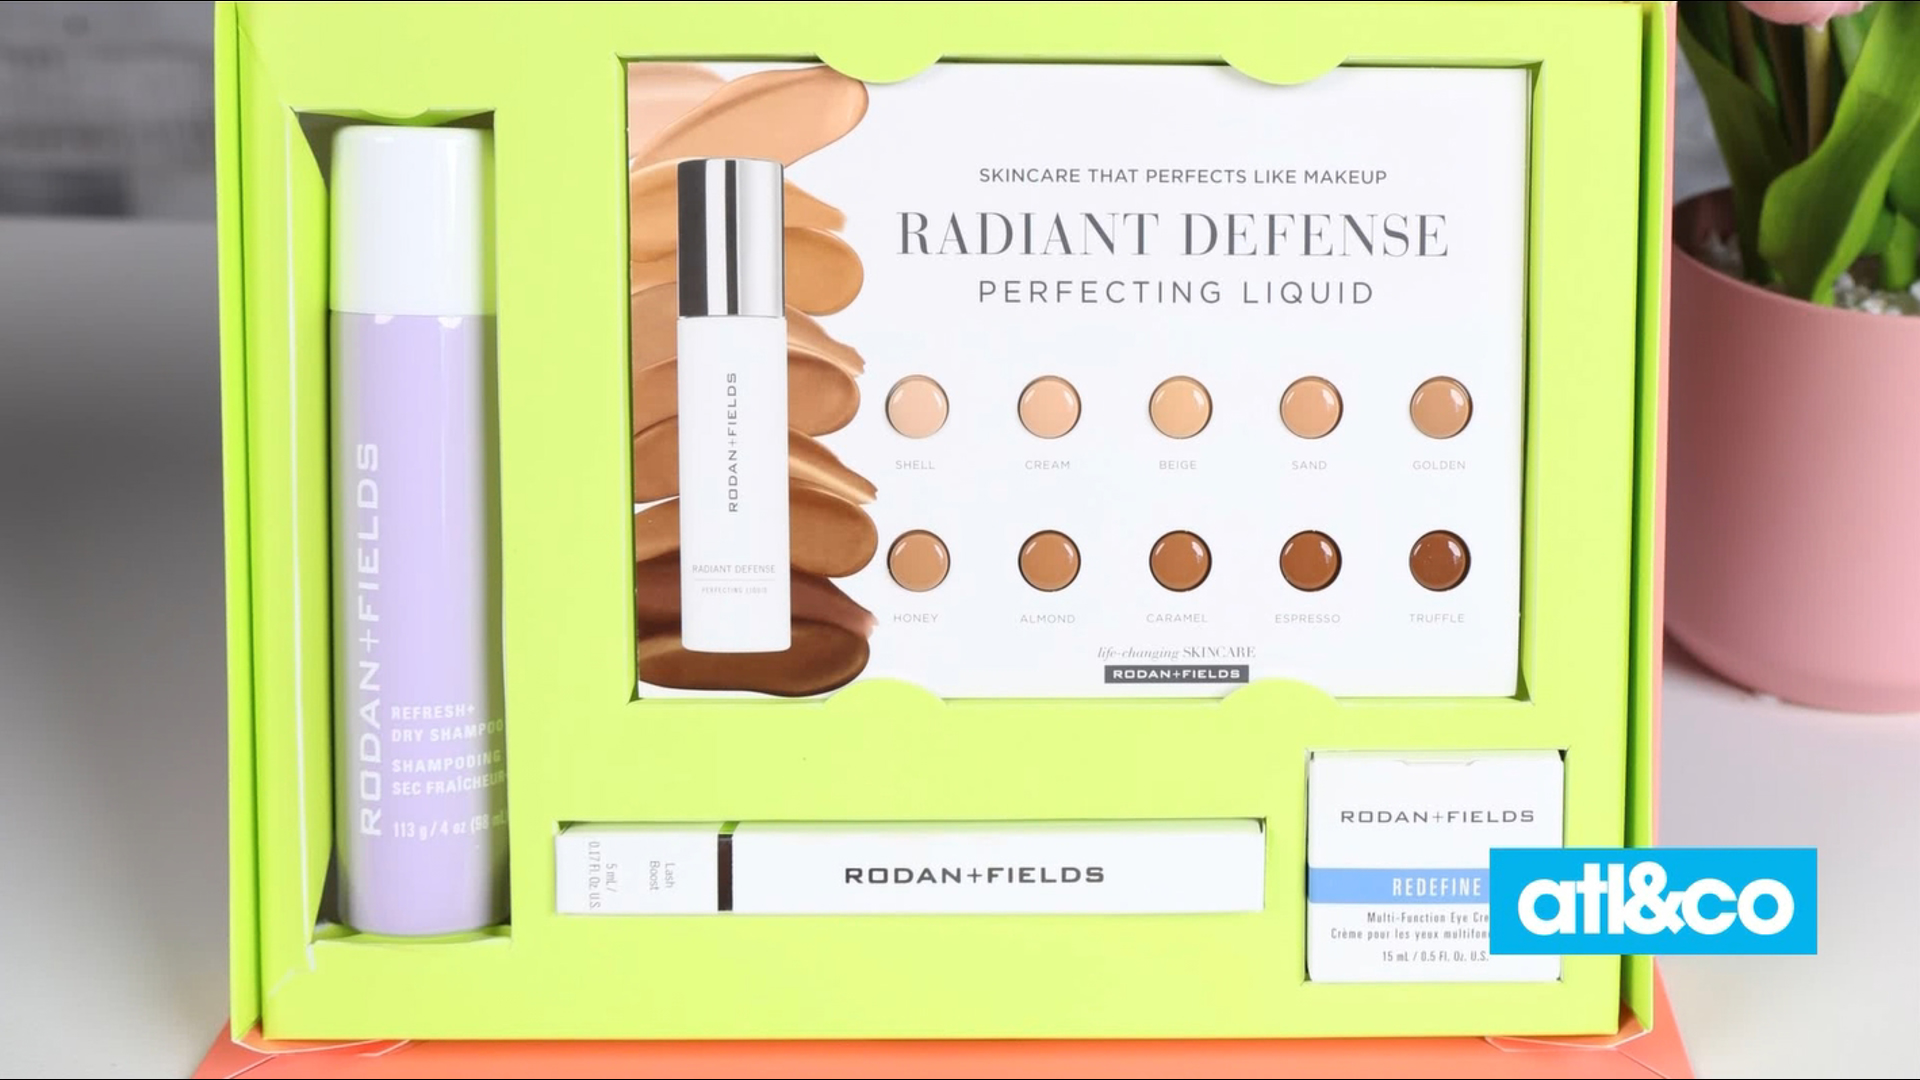 Lifestyle contributor Limor Suss shares beauty must-haves from Rodan + Fields and Lanolips.